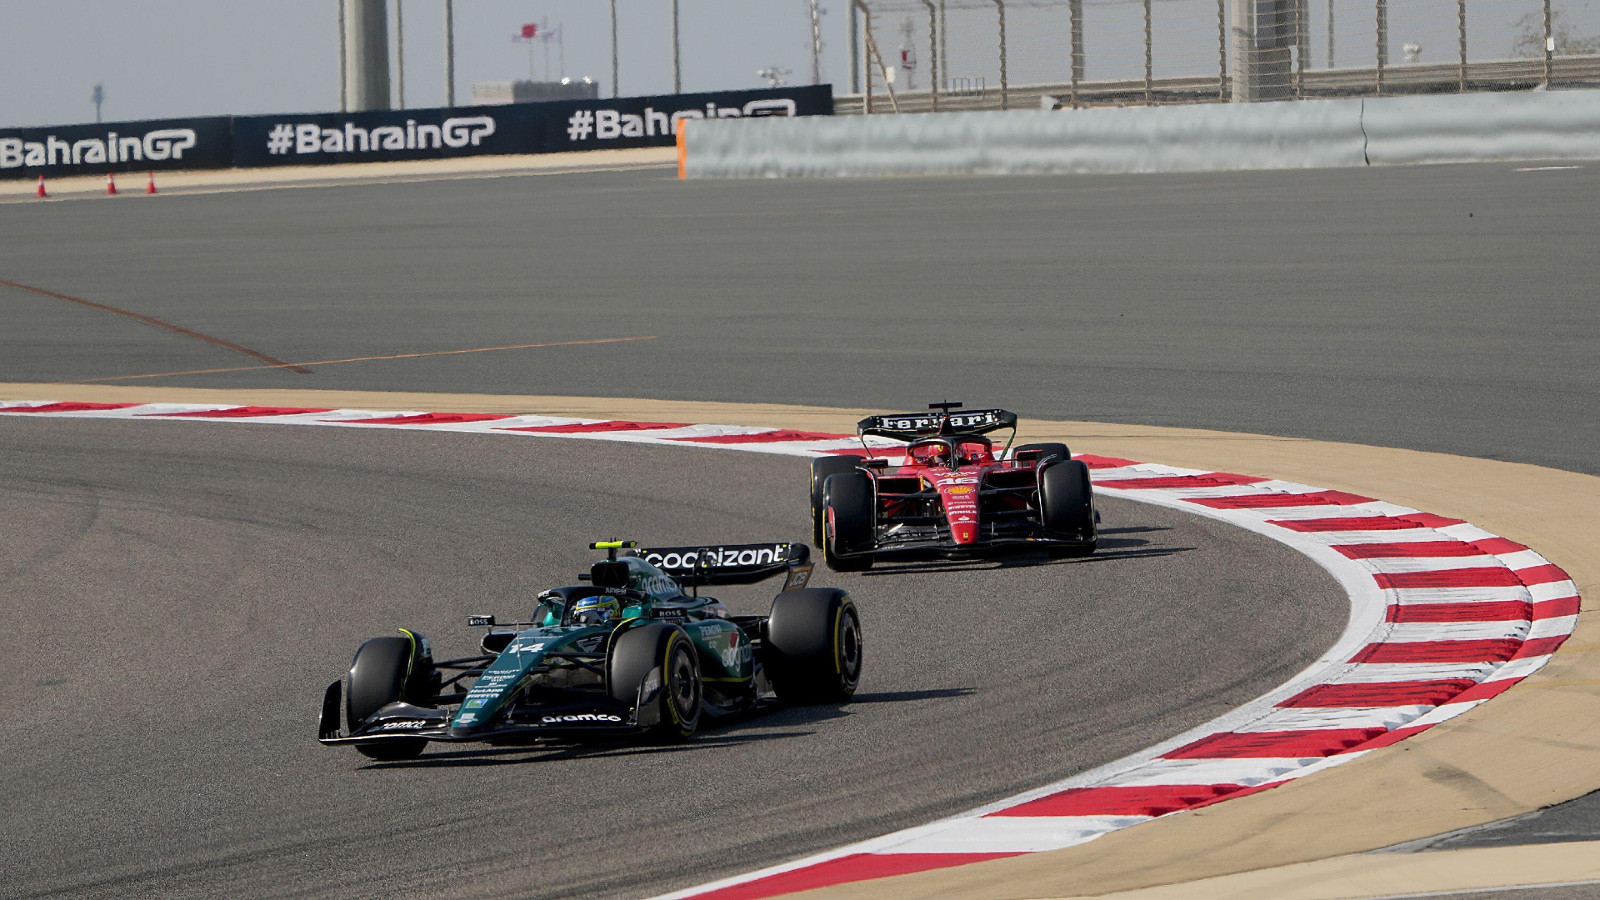 Aston Martin's Fernando Alonso on track during practice for the Bahrain Grand Prix. Sakhir, March 2023.